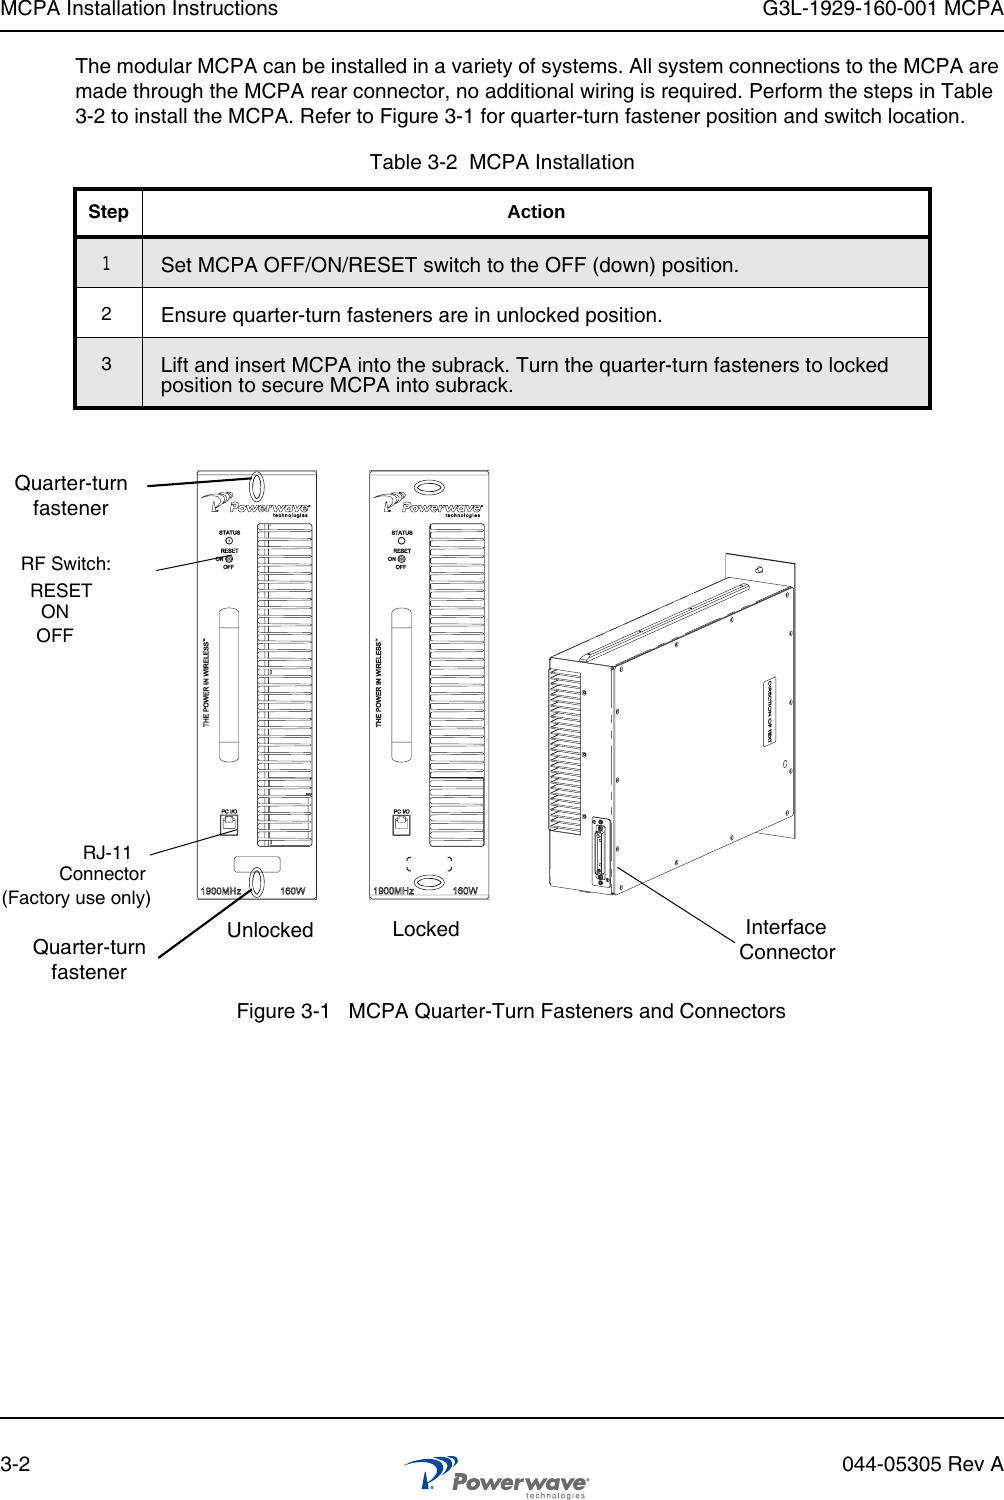 MCPA Installation Instructions G3L-1929-160-001 MCPA3-2 044-05305 Rev AThe modular MCPA can be installed in a variety of systems. All system connections to the MCPA are made through the MCPA rear connector, no additional wiring is required. Perform the steps in Table 3-2 to install the MCPA. Refer to Figure 3-1 for quarter-turn fastener position and switch location.Table 3-2  MCPA InstallationStep Action1Set MCPA OFF/ON/RESET switch to the OFF (down) position.2Ensure quarter-turn fasteners are in unlocked position.3Lift and insert MCPA into the subrack. Turn the quarter-turn fasteners to locked position to secure MCPA into subrack.Figure 3-1   MCPA Quarter-Turn Fasteners and ConnectorsRF Switch:RJ-11Connector(Factory use only)Quarter-turnfastenerRESETONOFFQuarter-turnfastenerInterfaceConnectorUnlocked Locked